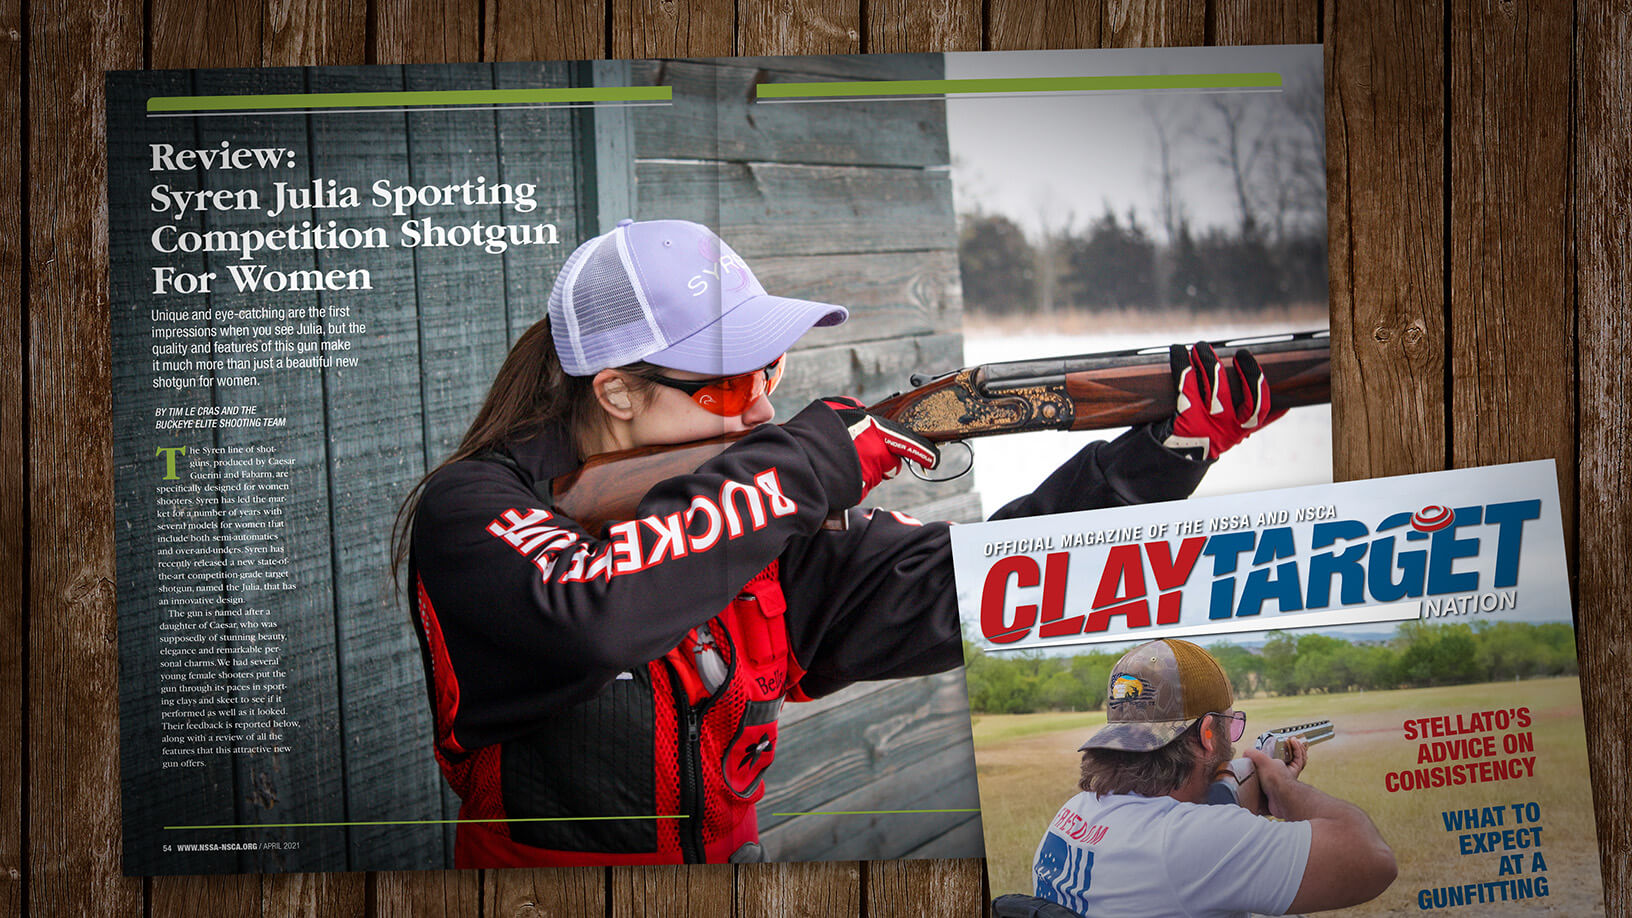 [Clay Target Nation 04:21] Review: Syren Julia Sporting Competition Shotgun for Women